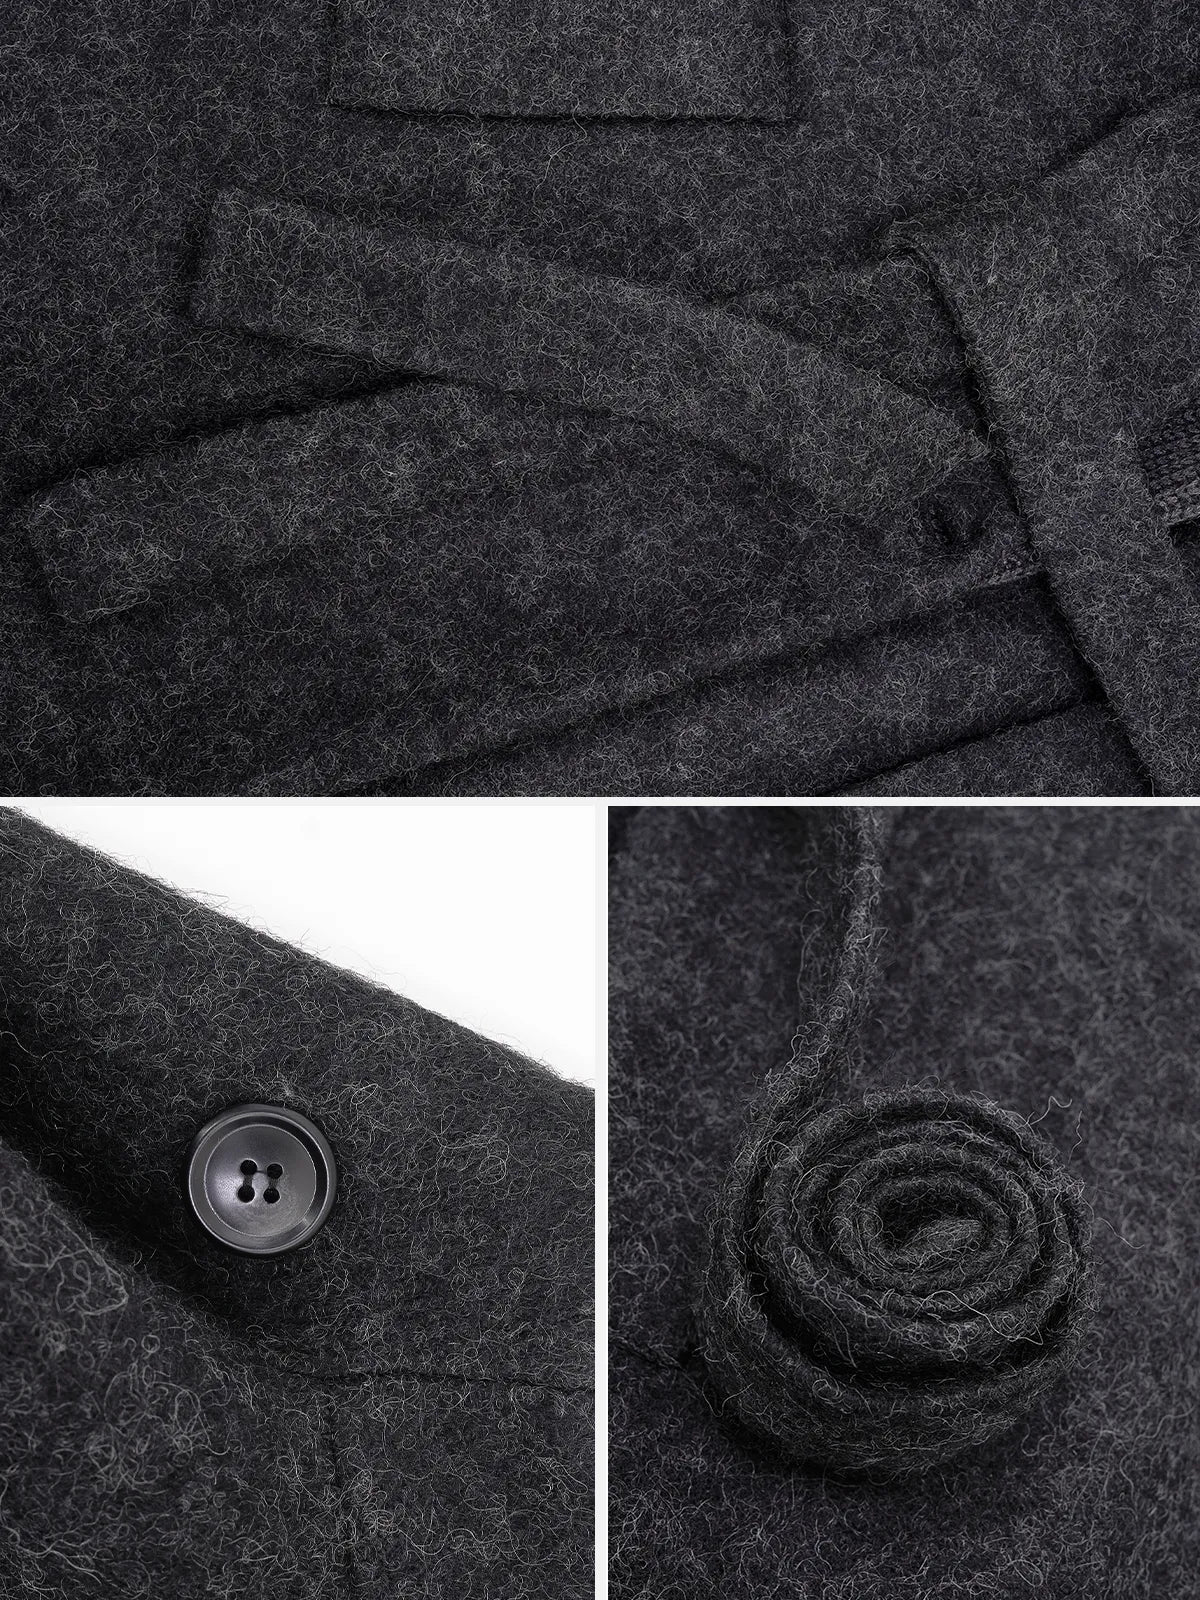 Luxurious texture of high-quality wool for added comfort